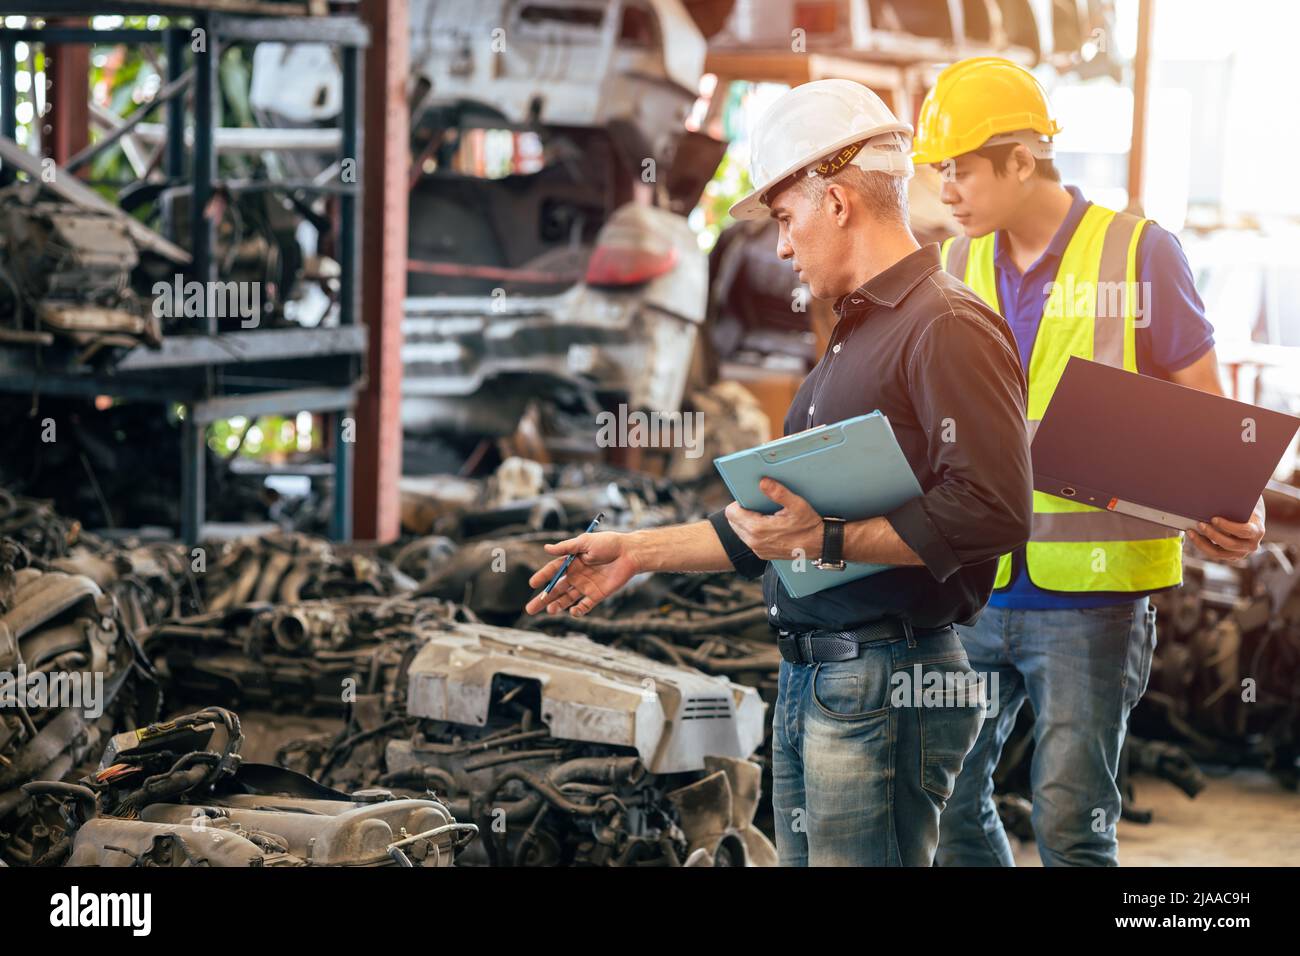 Engineer foreman manager working checking stock with young male staff worker Stock Photo